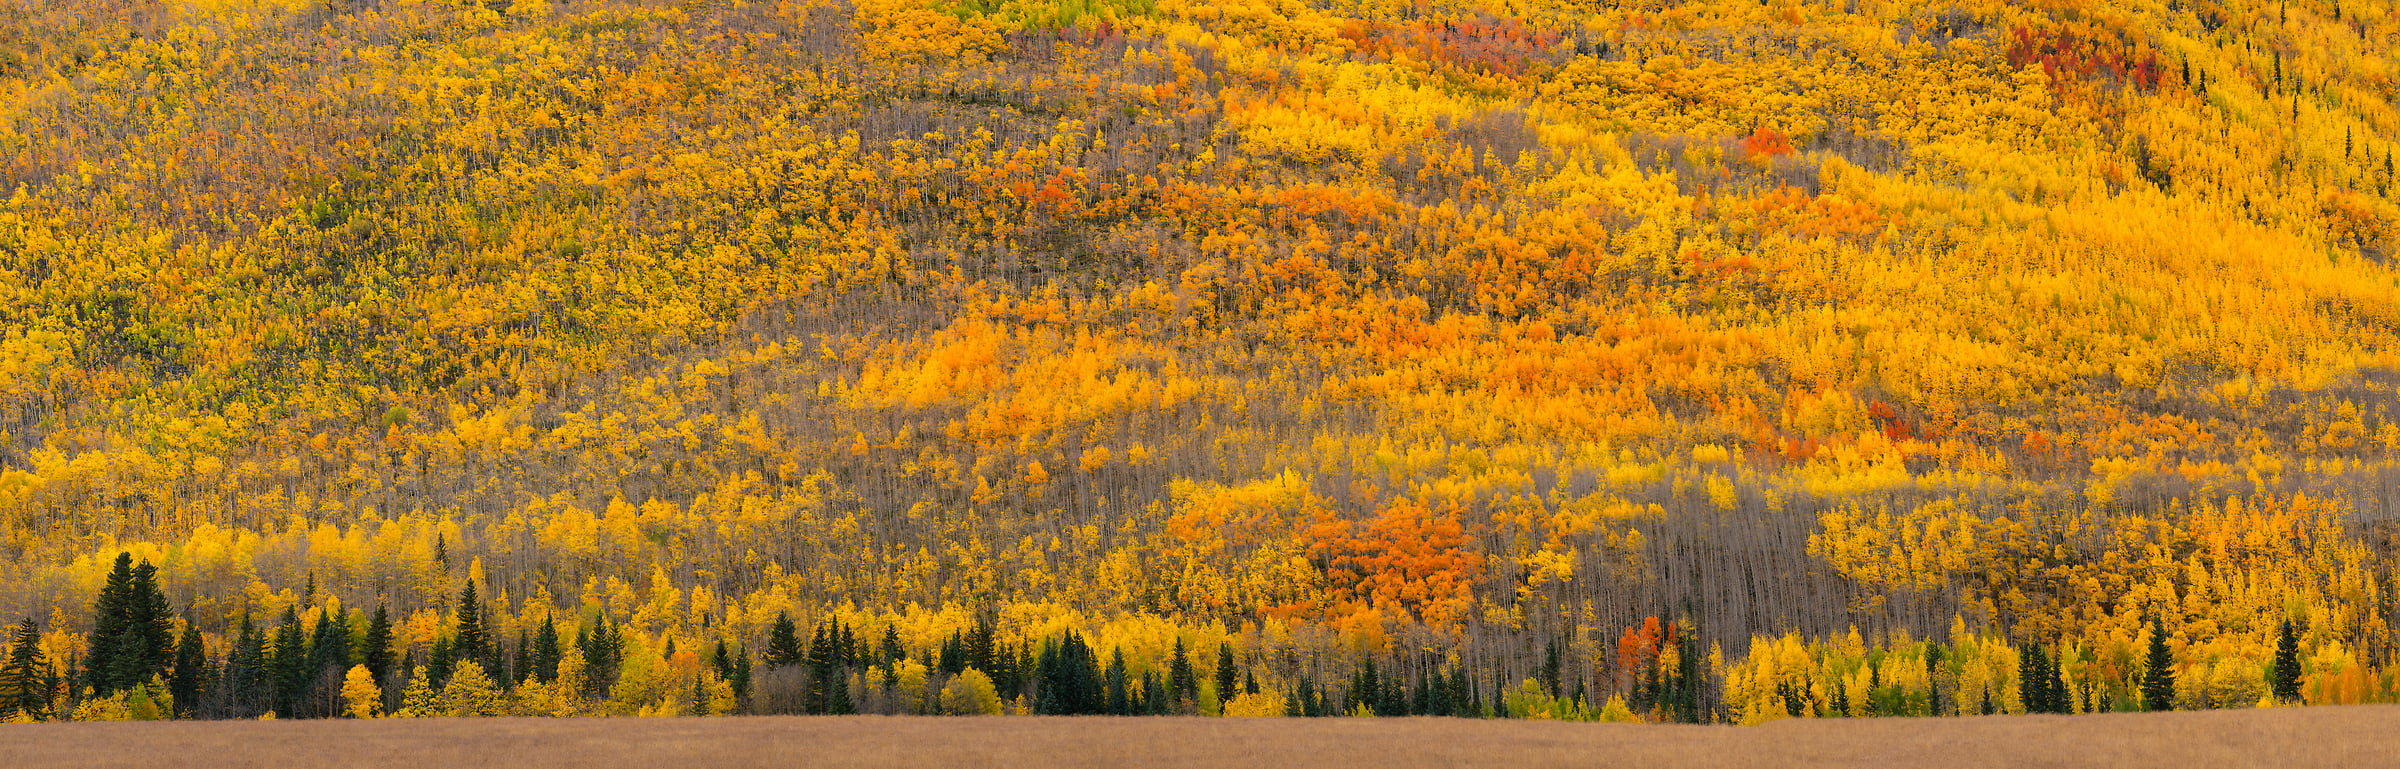 633 megapixels! A very high resolution, wallpaper photo of a hill with autumn foliage of aspen trees; photograph created by Jeff Lewis in Ouray, Colorado.